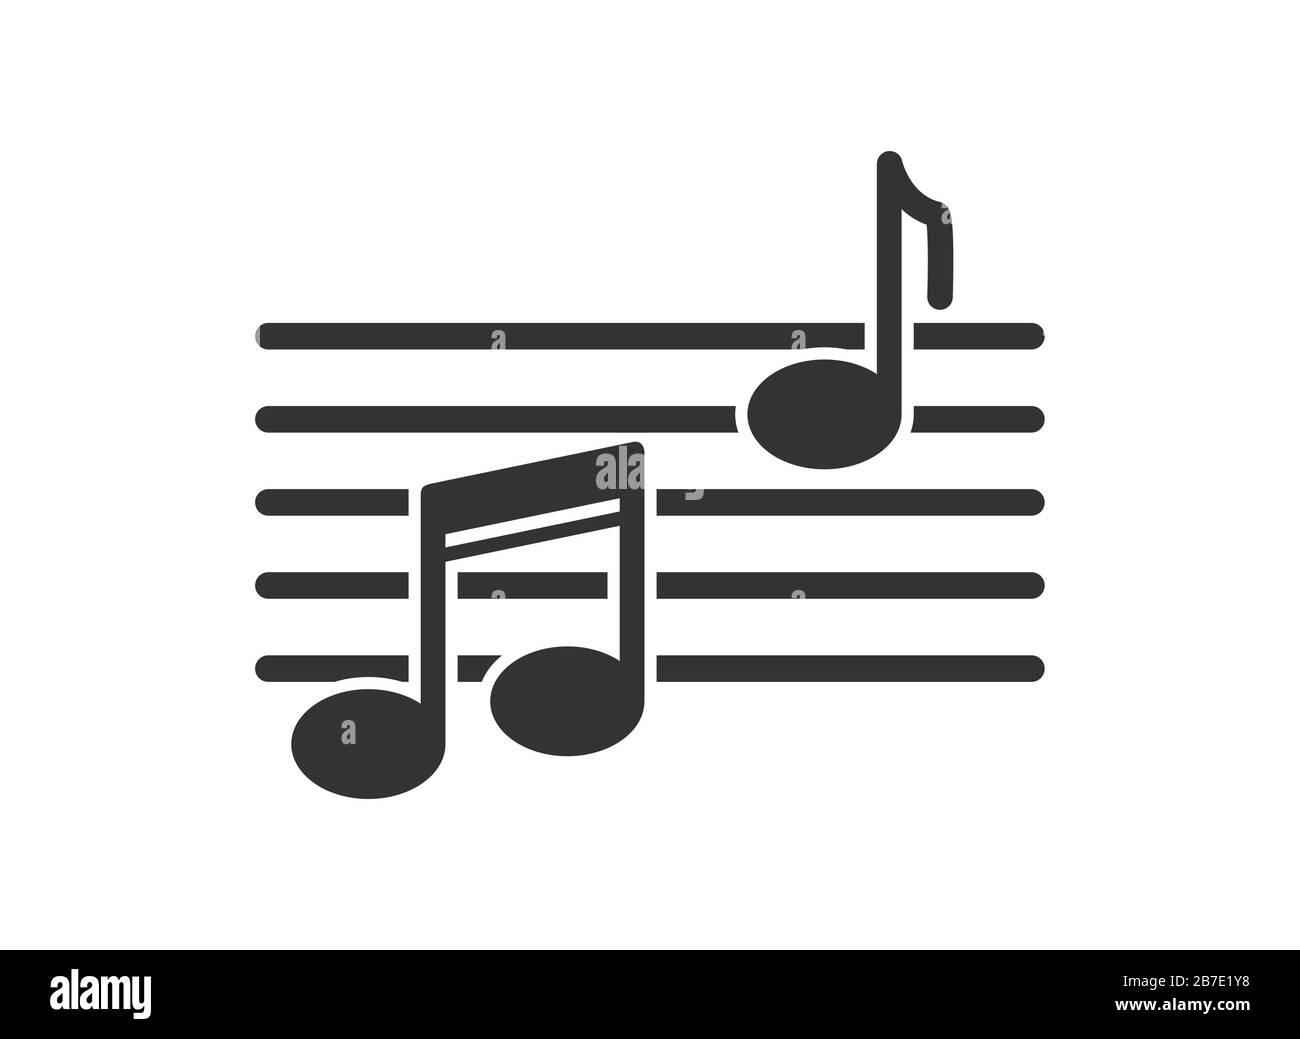 Icon of a melody, a sheet music stand with notes. Simple flat design for website and app logo Stock Vector